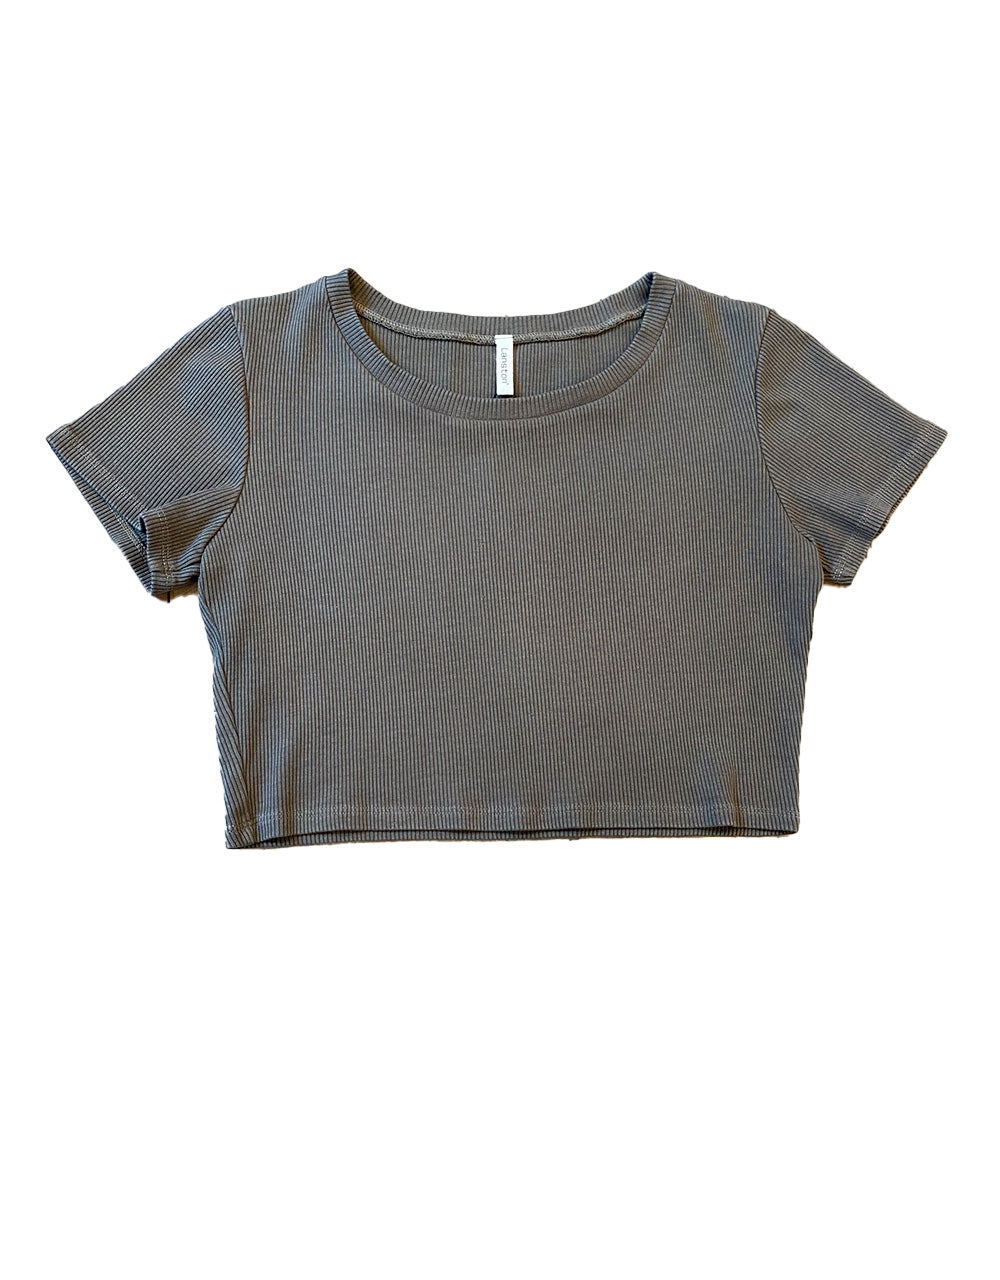 Cropped Tee- Military